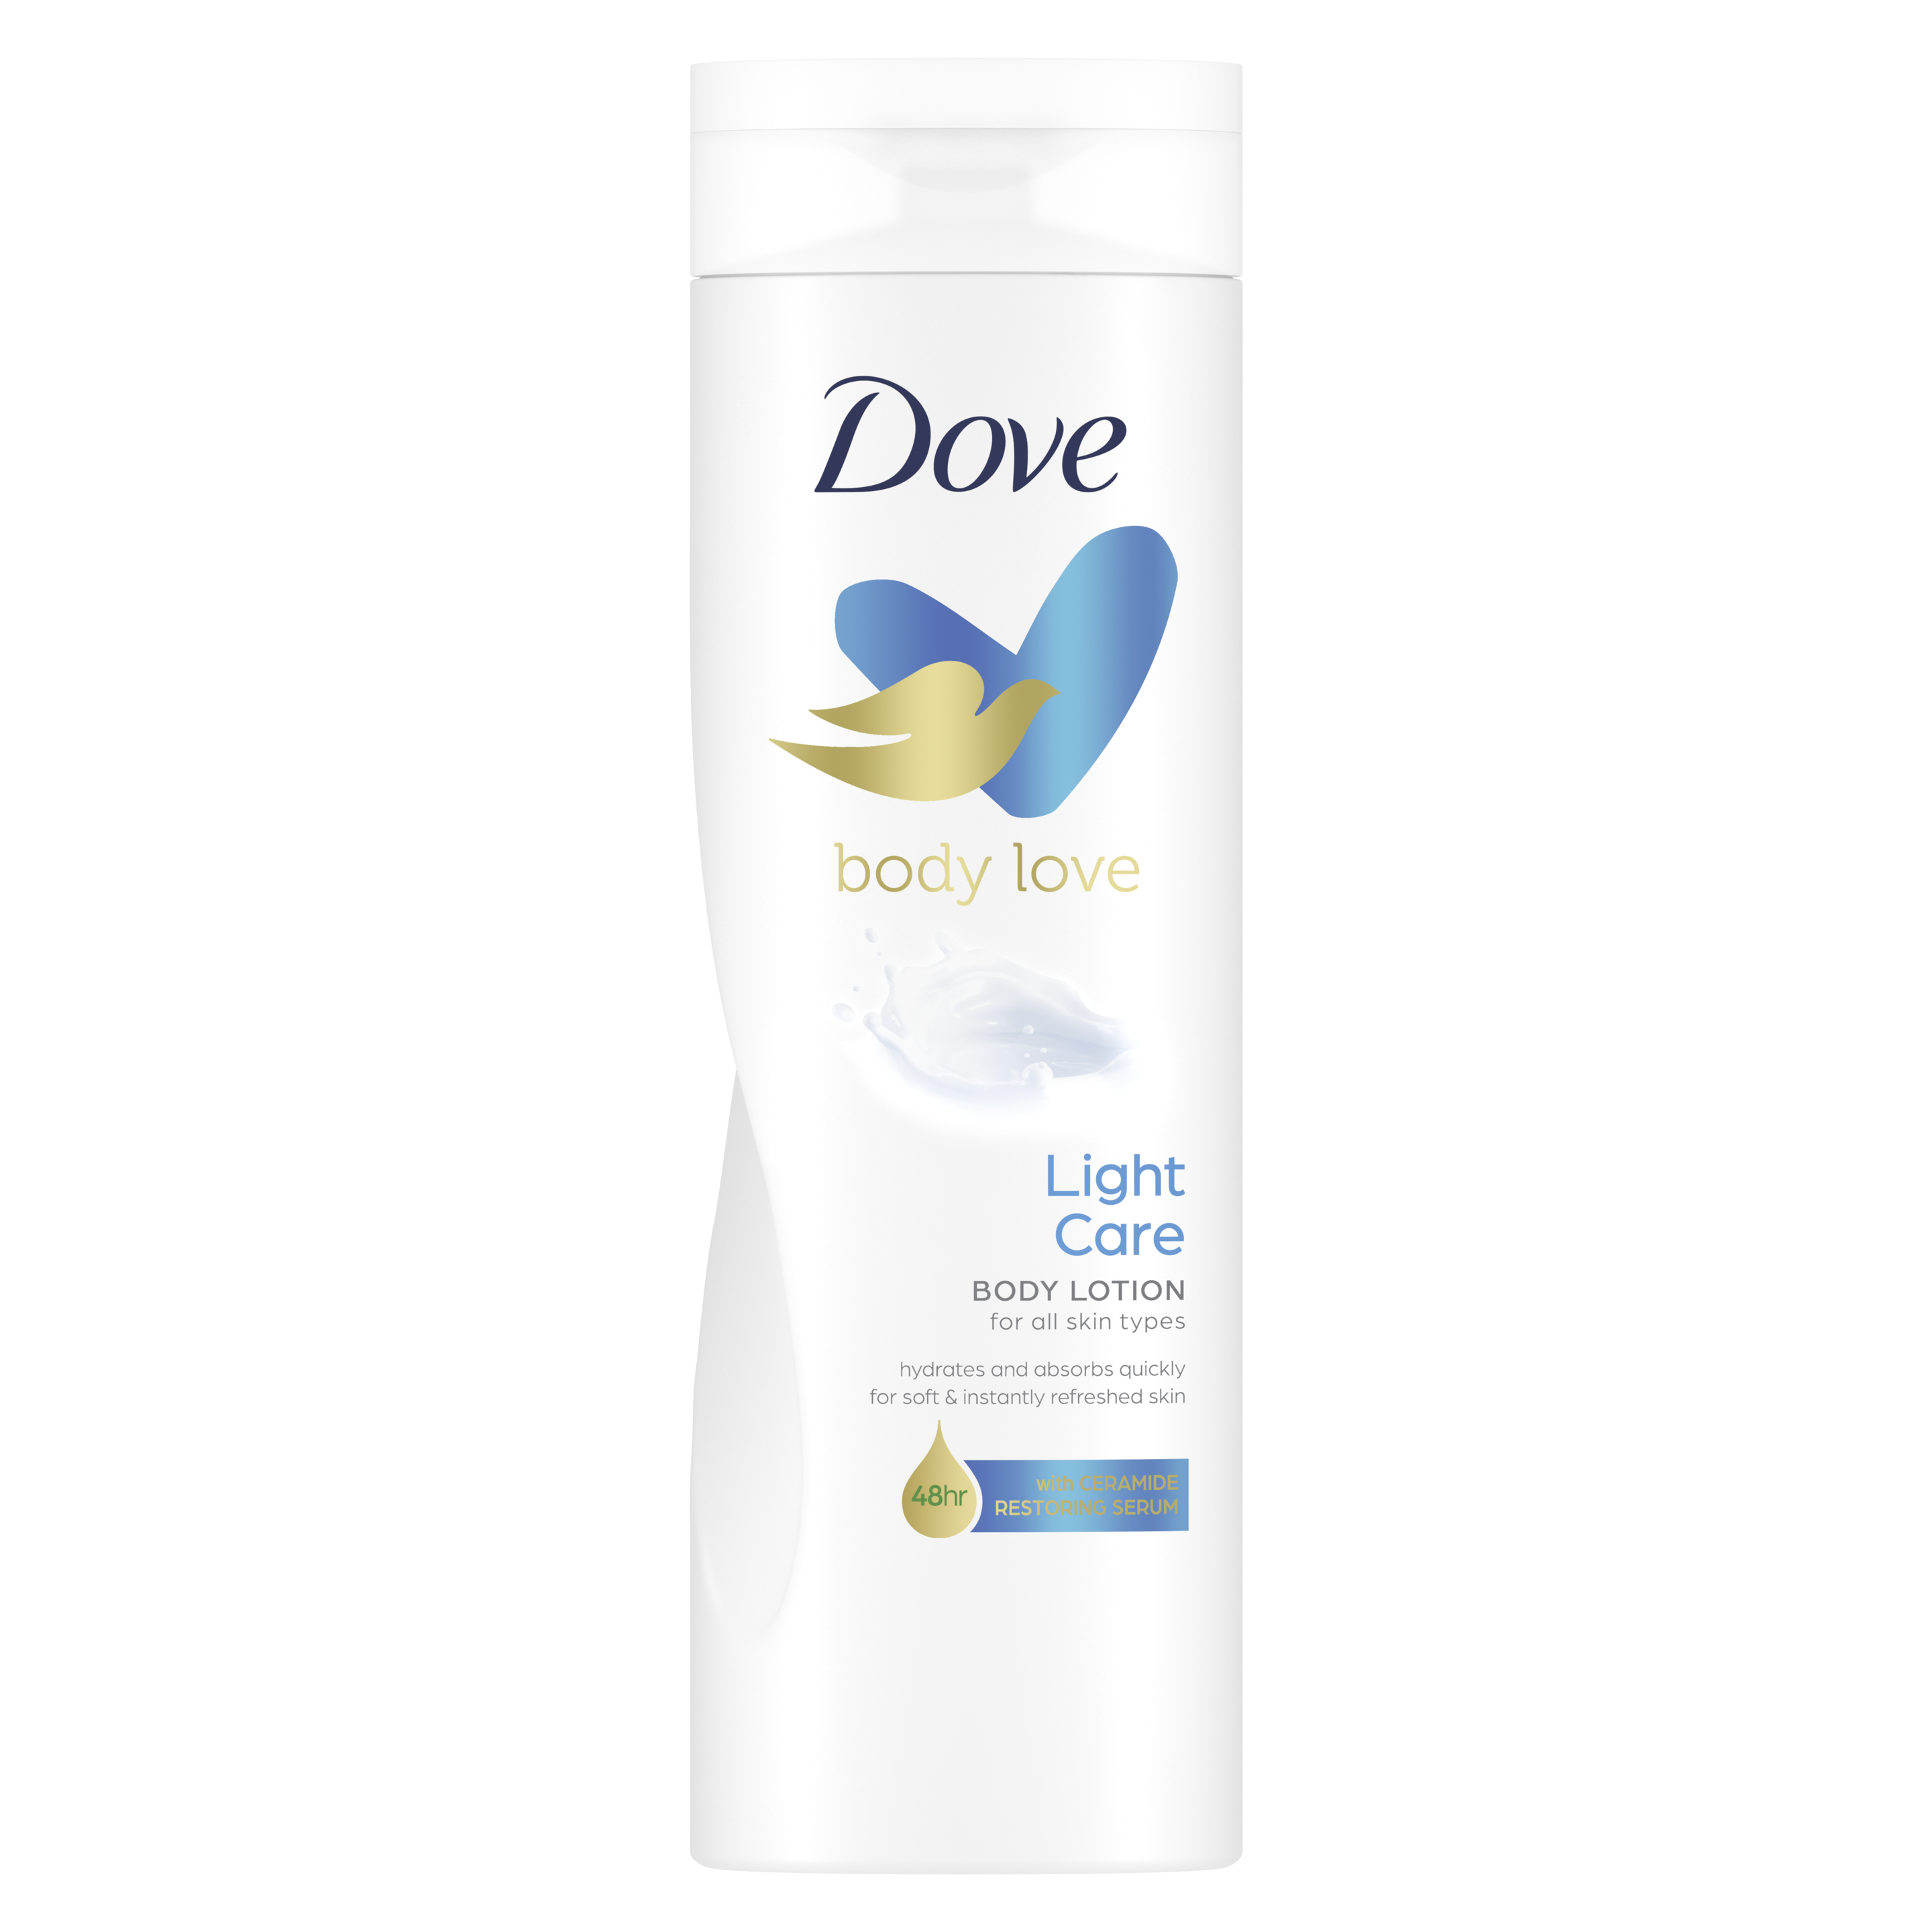 Dove Body Love Light Care Body Lotion for All Skin Types 400ml